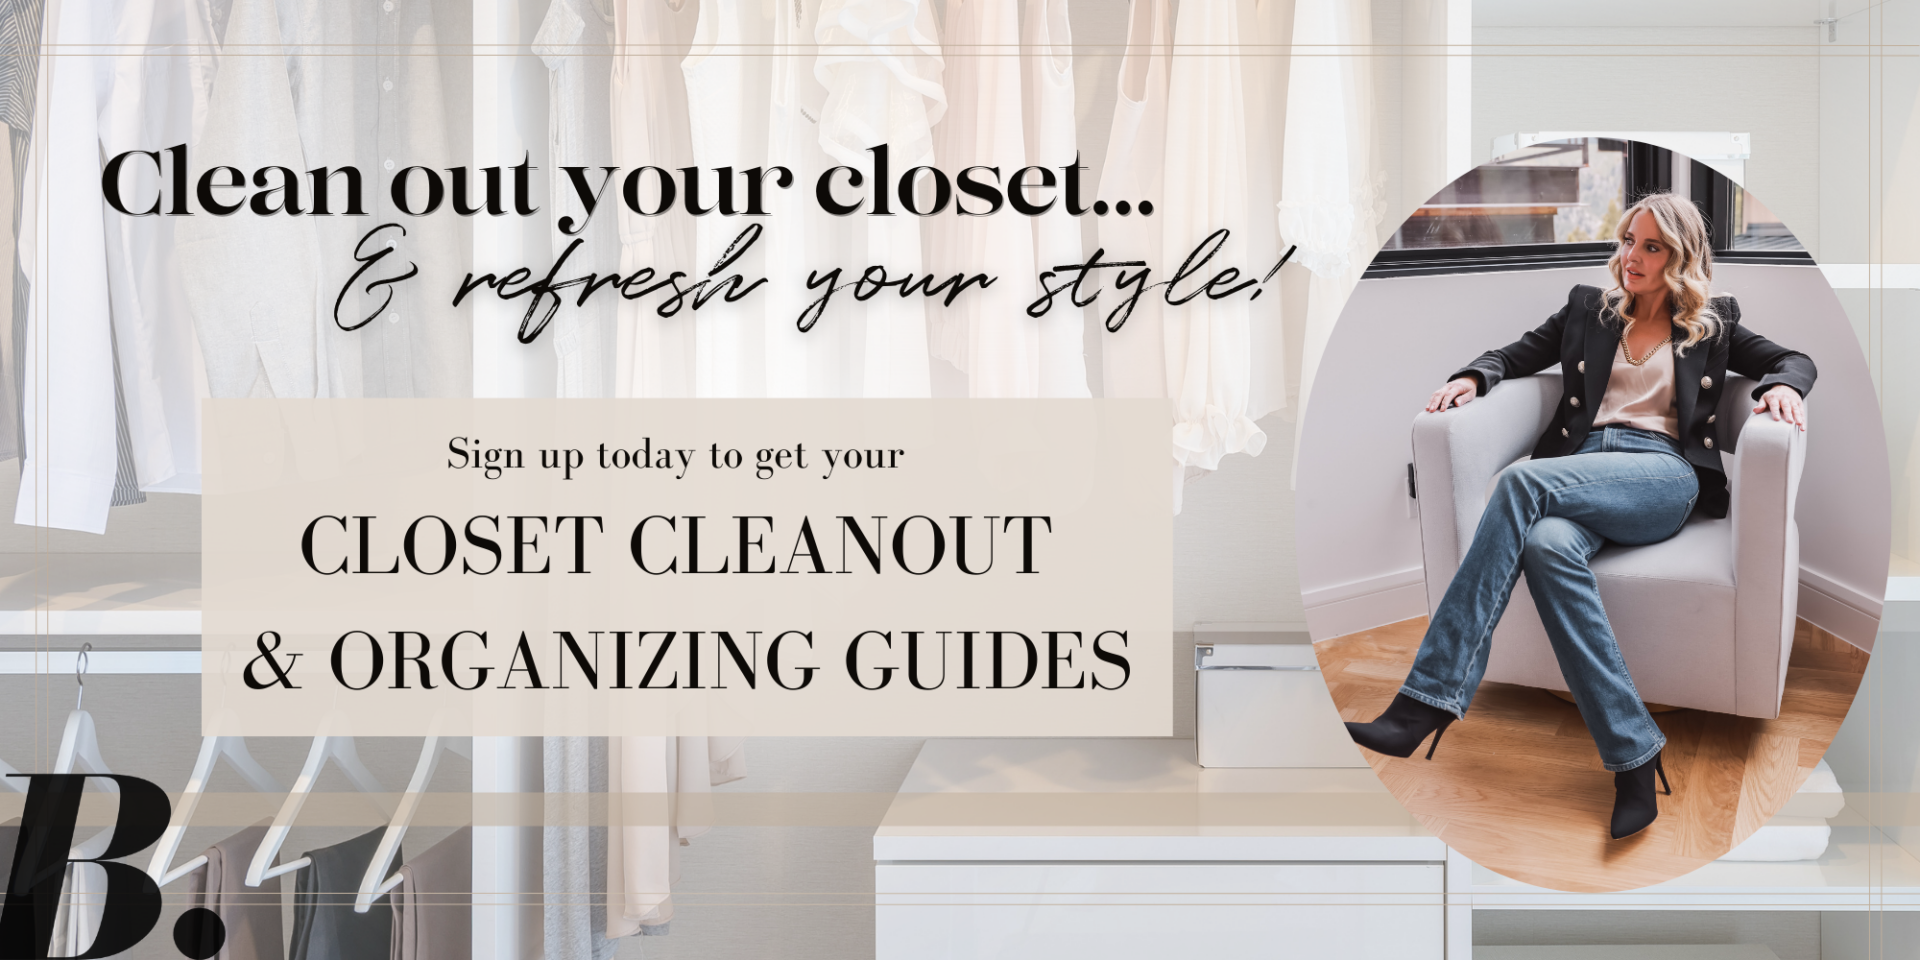 Vogue Editors Share Their Closet-Cleaning Tips